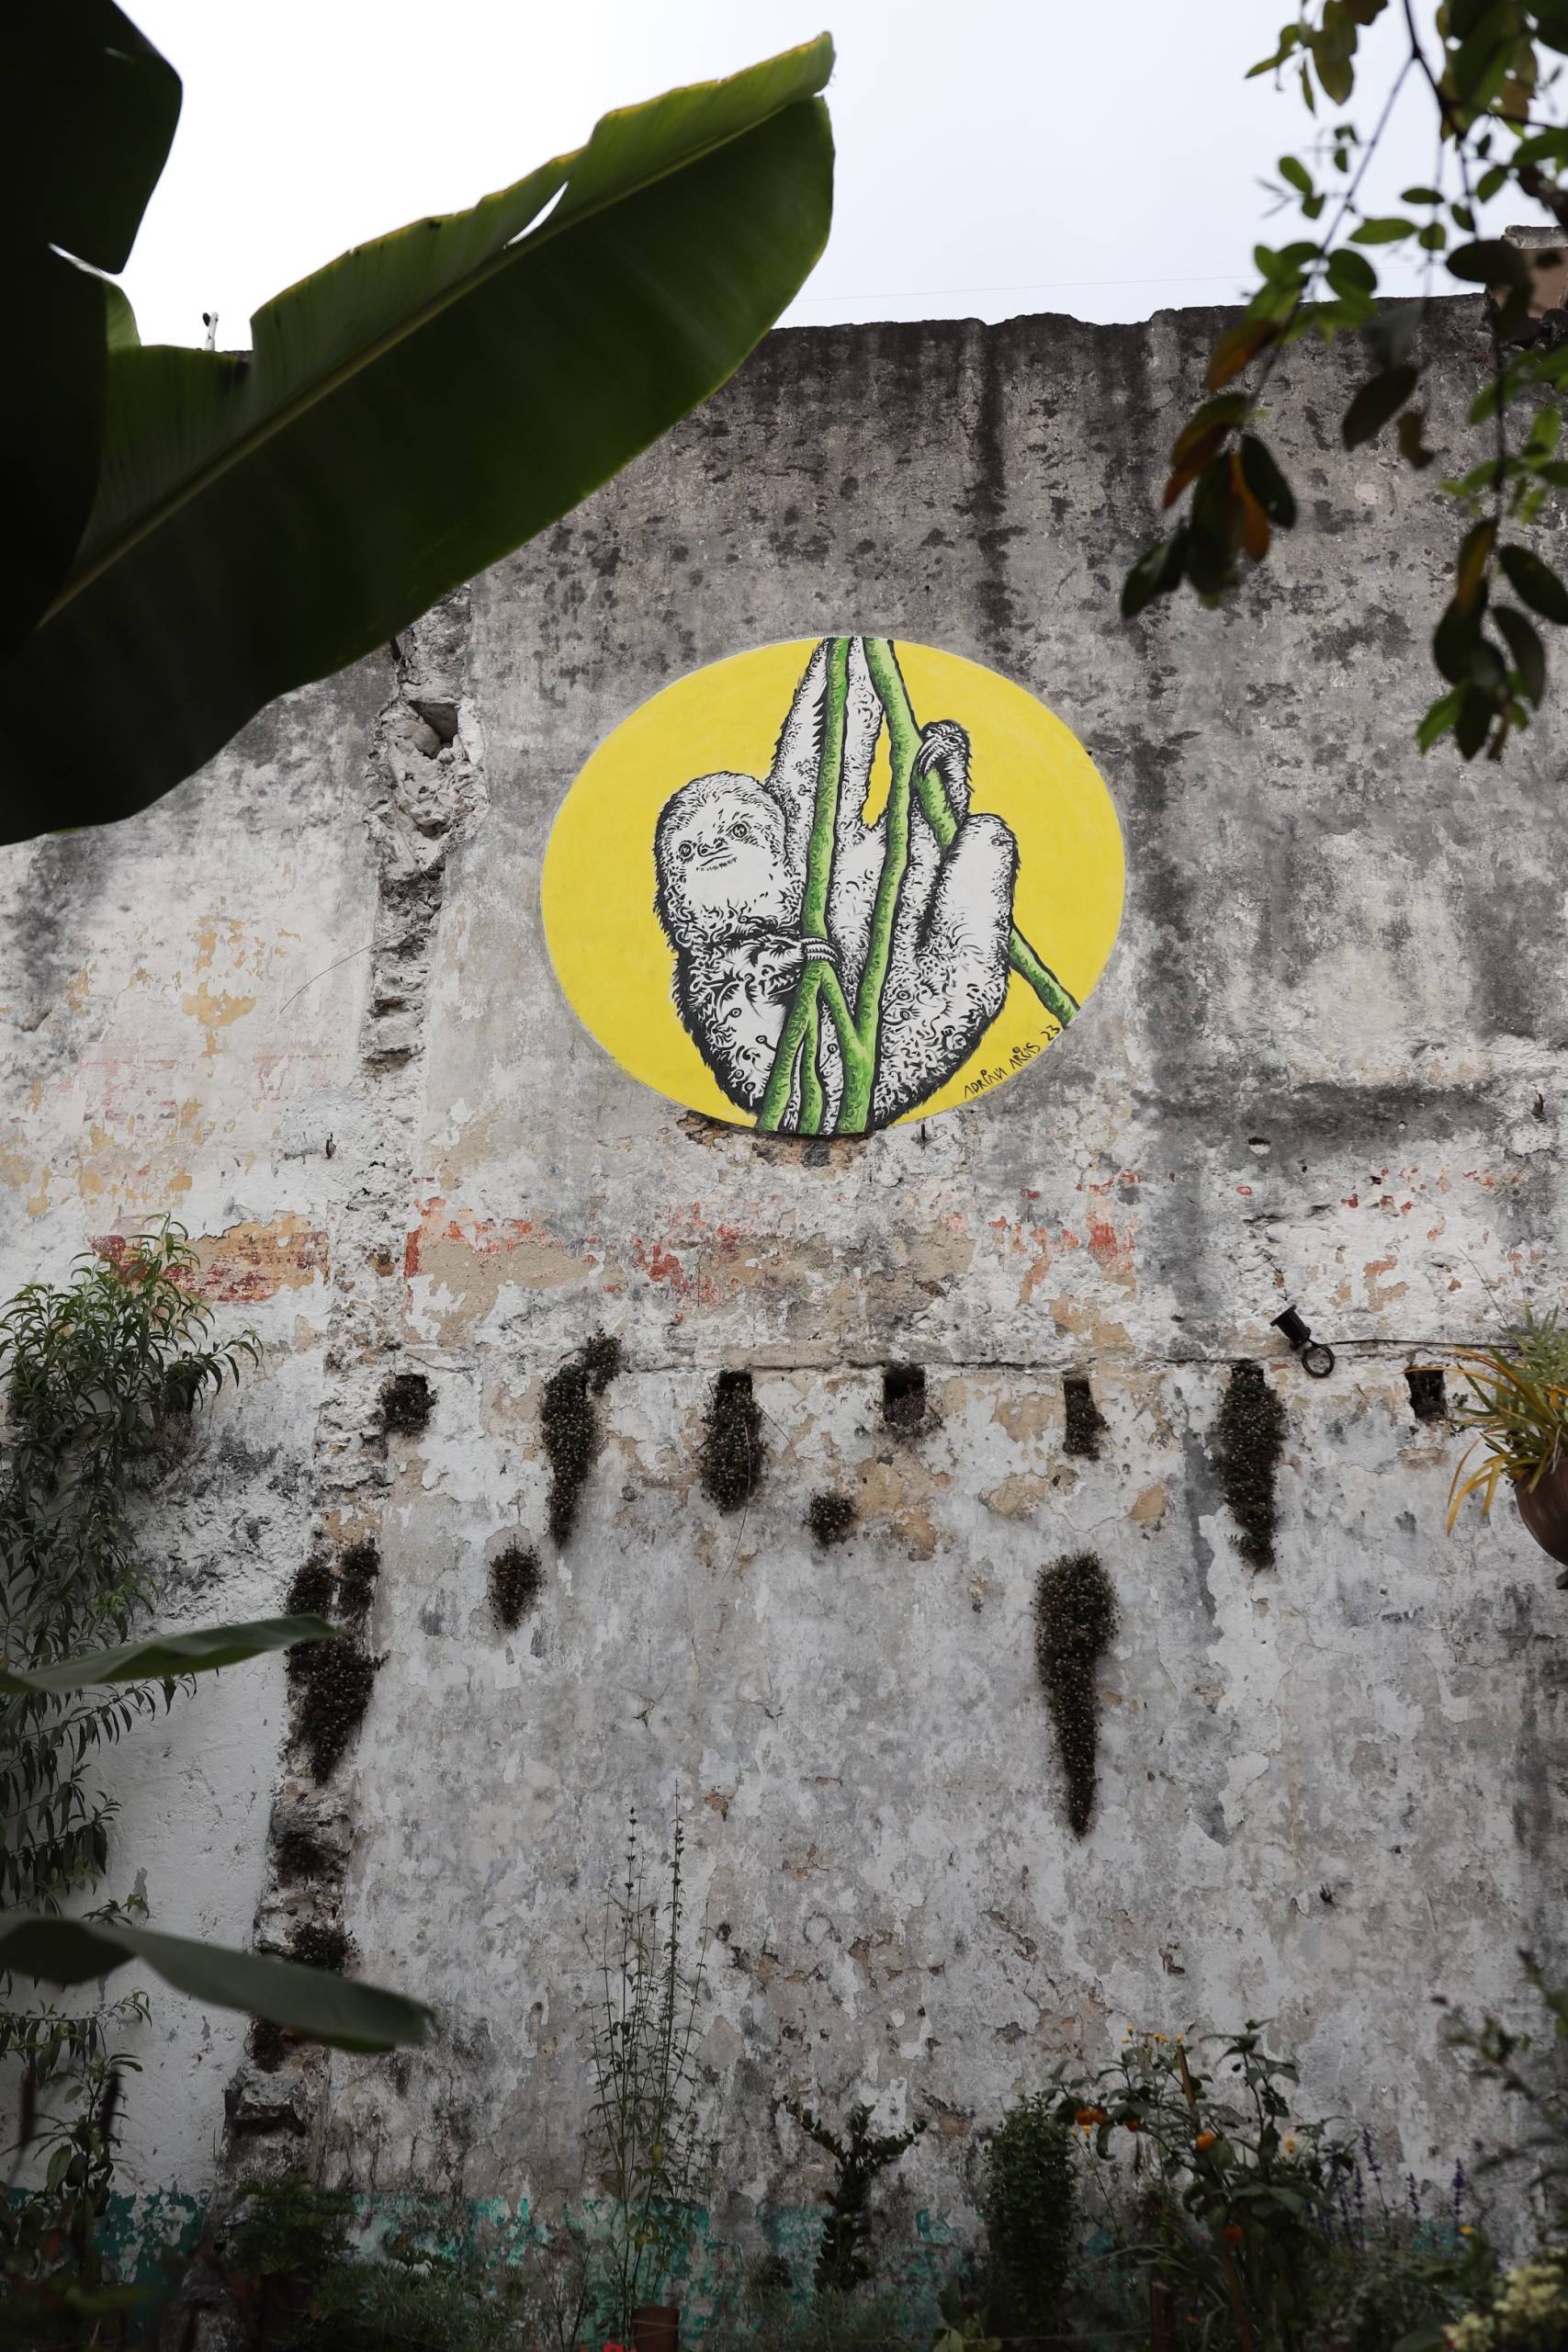 a mural of a sloth is painted on a tall concrete wall in an outdoor garden